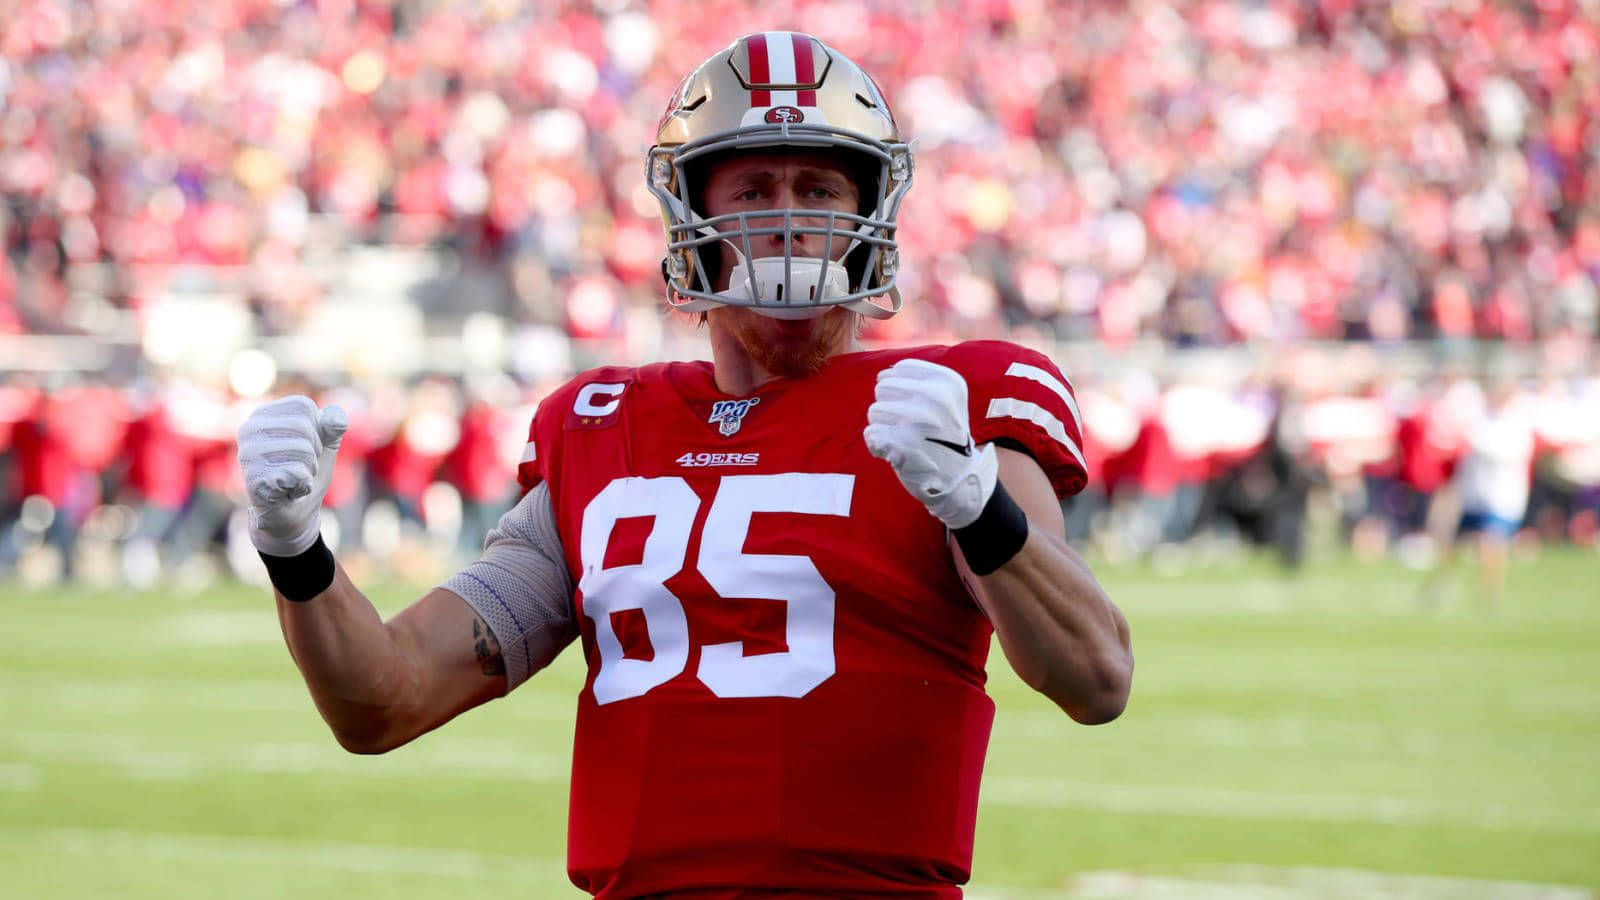 George Kittle Adds Another Arm Tattoo To The Collection